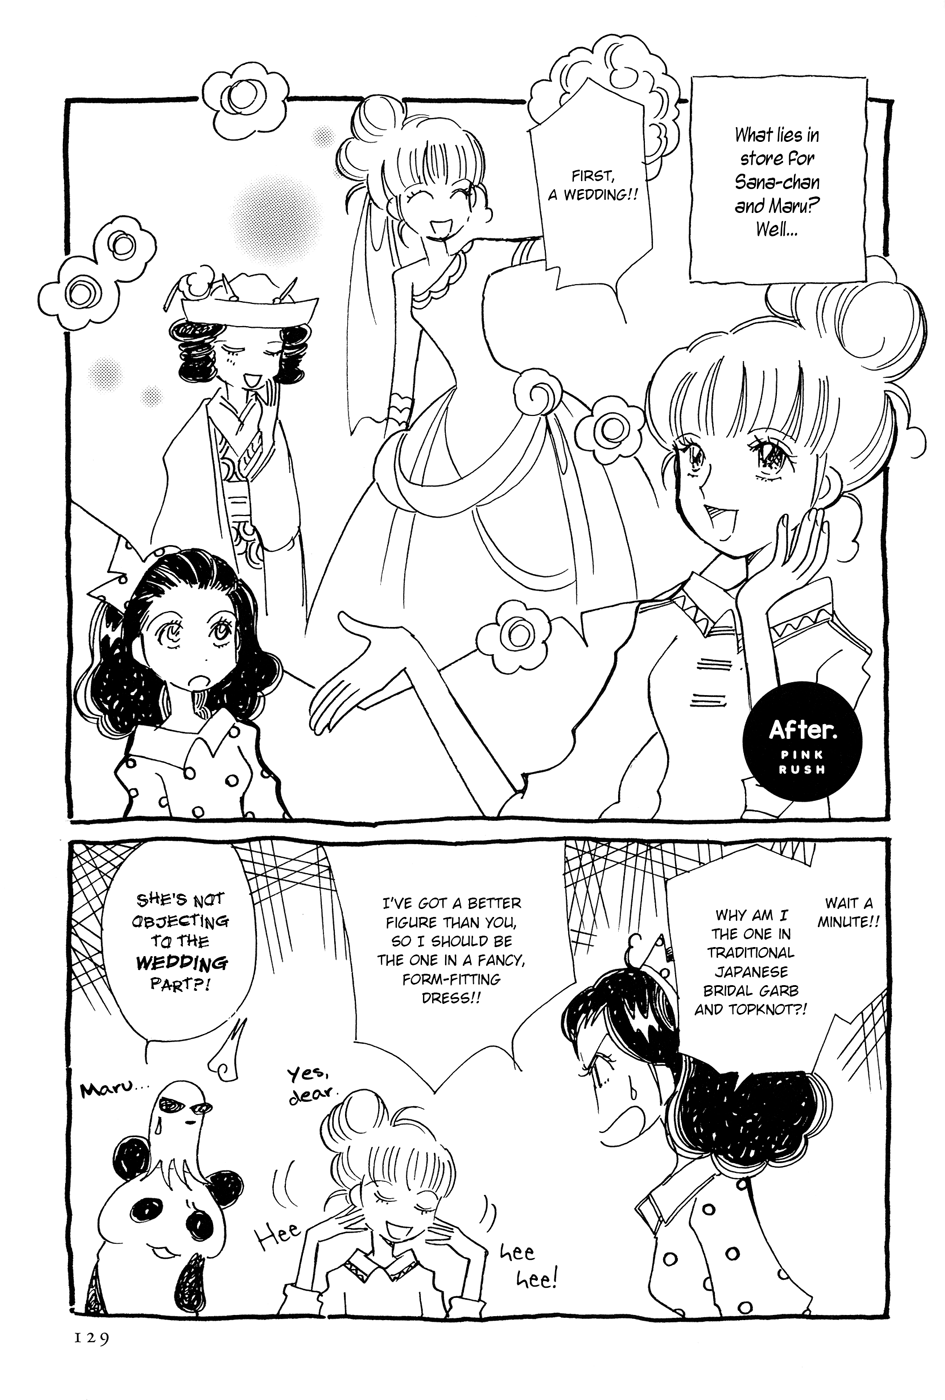 Pink Rush Vol.1 Chapter 12.5: After - Picture 1